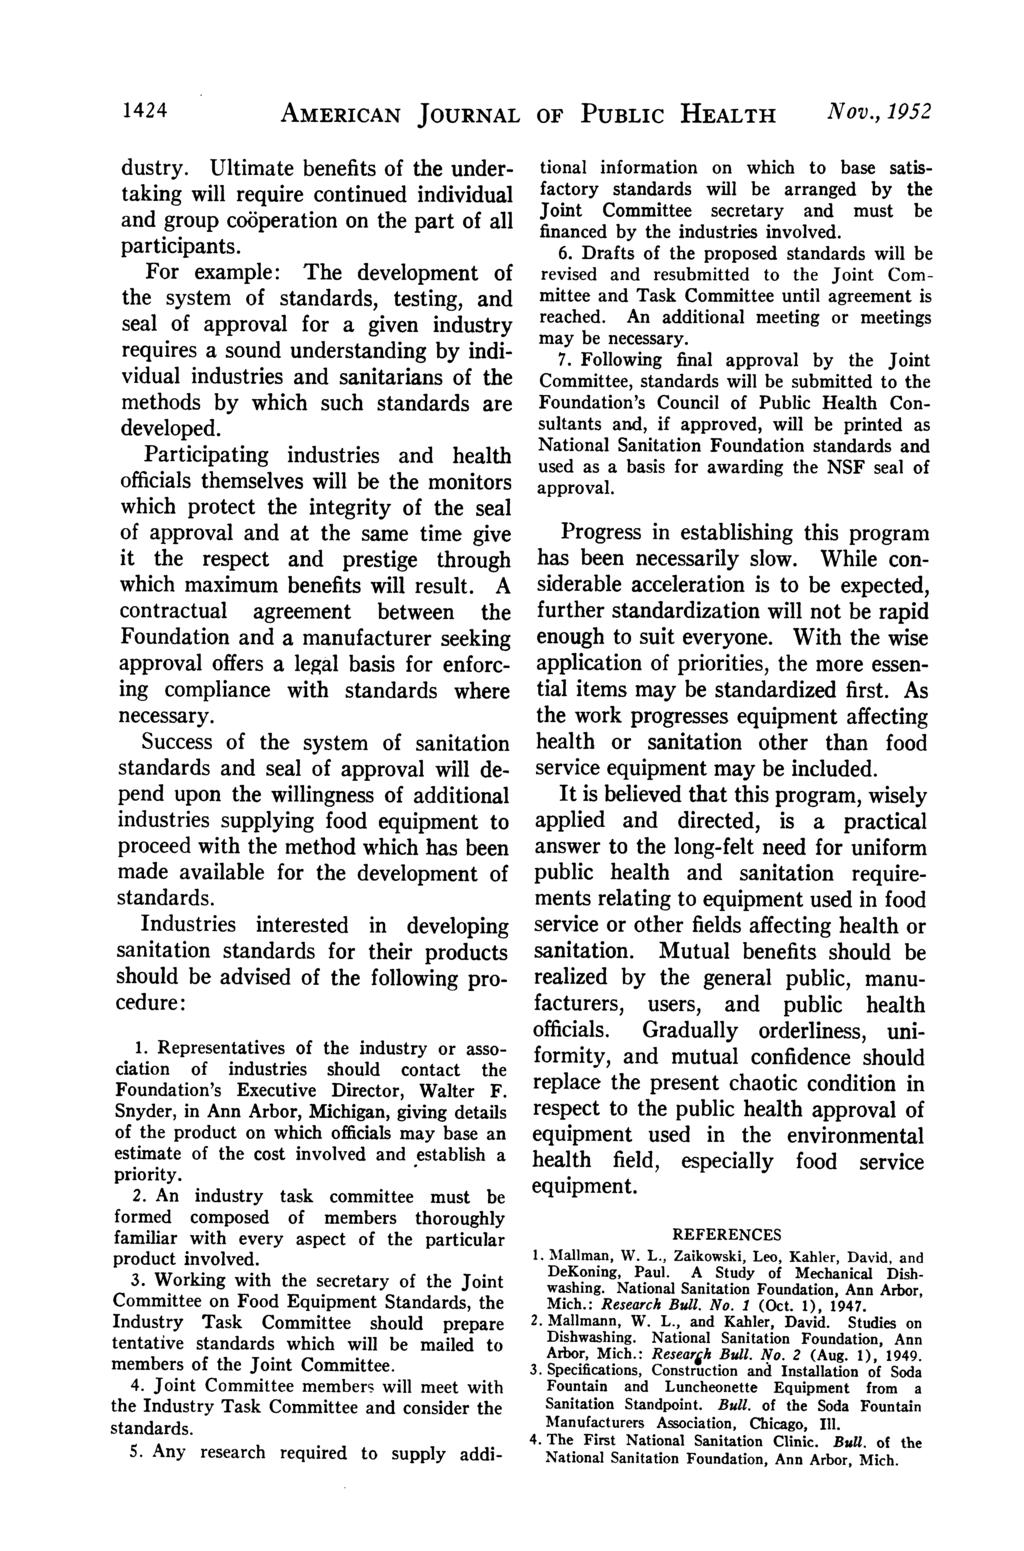 1424 AMERICAN JOURNAL OF PUBLIC HEALTH Nov., 1952 dustry. Ultimate benefits of the undertaking will require continued individual and group cooperation on the part of all participants.